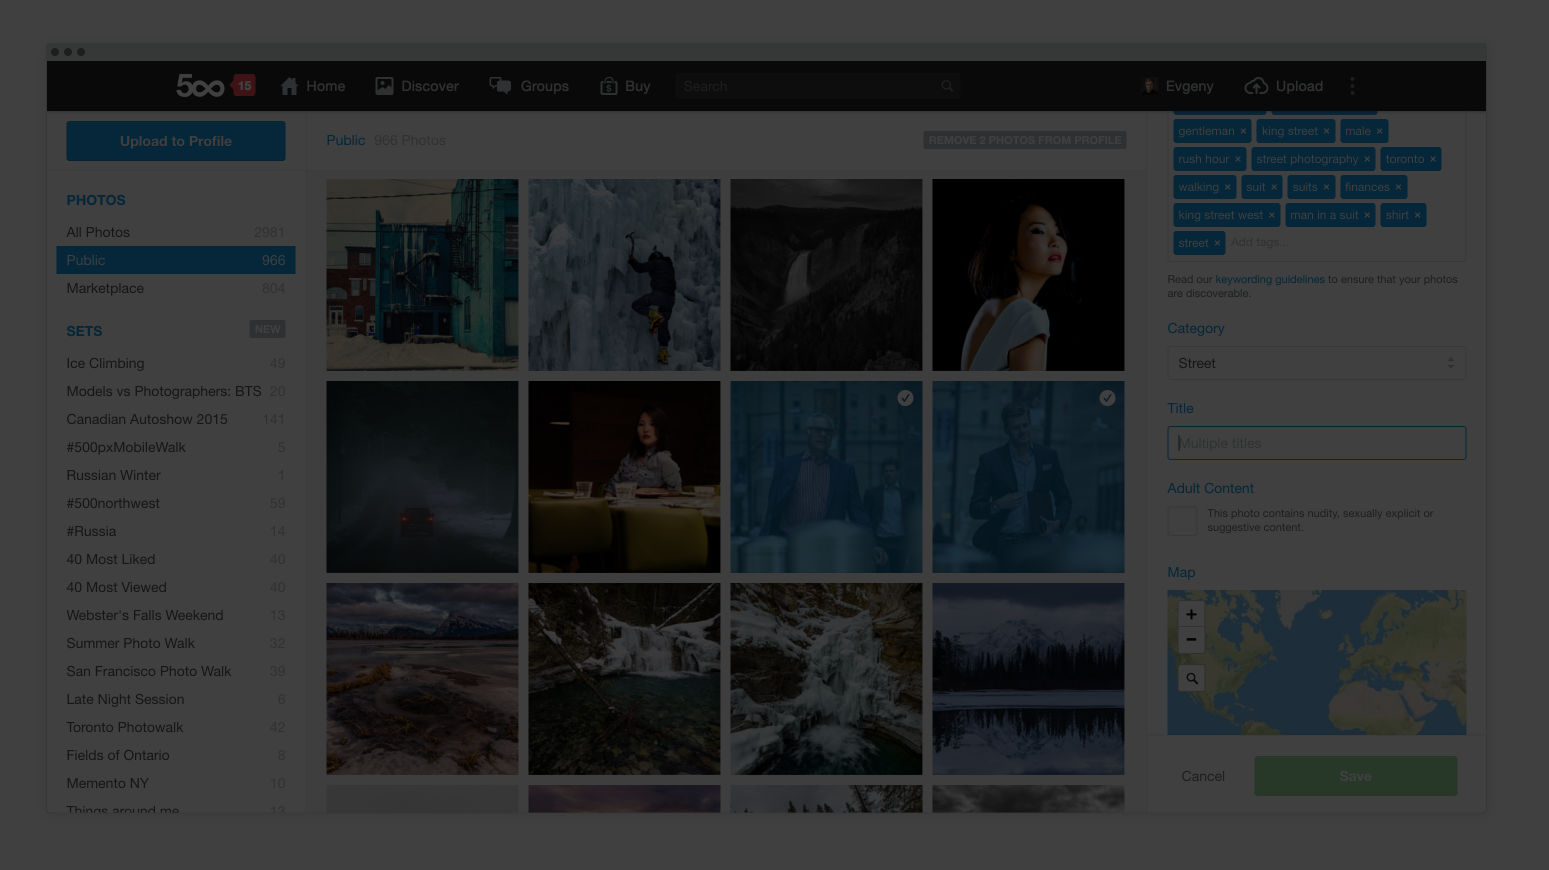 Check Out the New 500px Photo Manager, Now with Bulk Photo Editing!